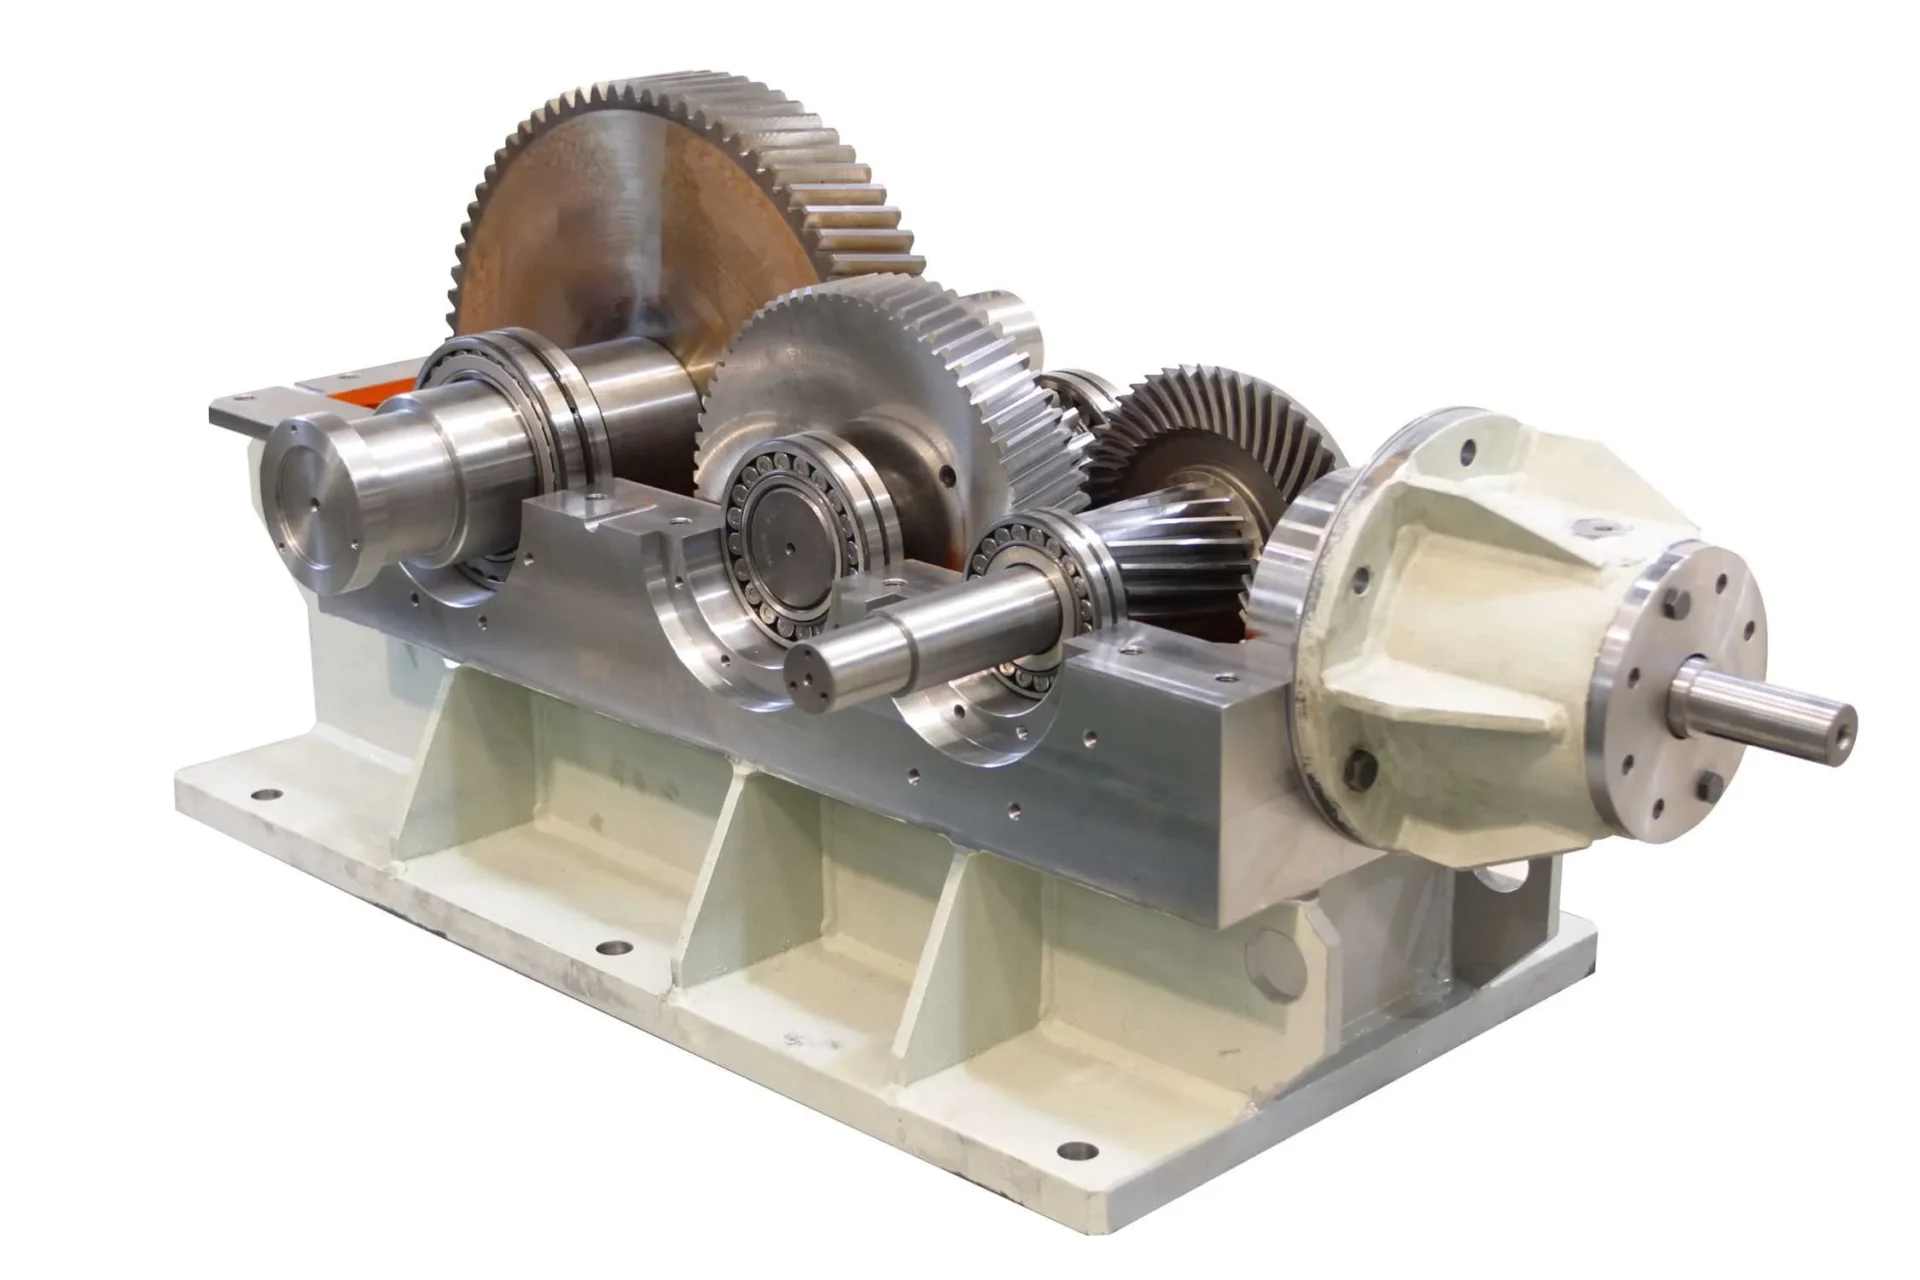 Future Prospects of the Industrial Gearbox Market